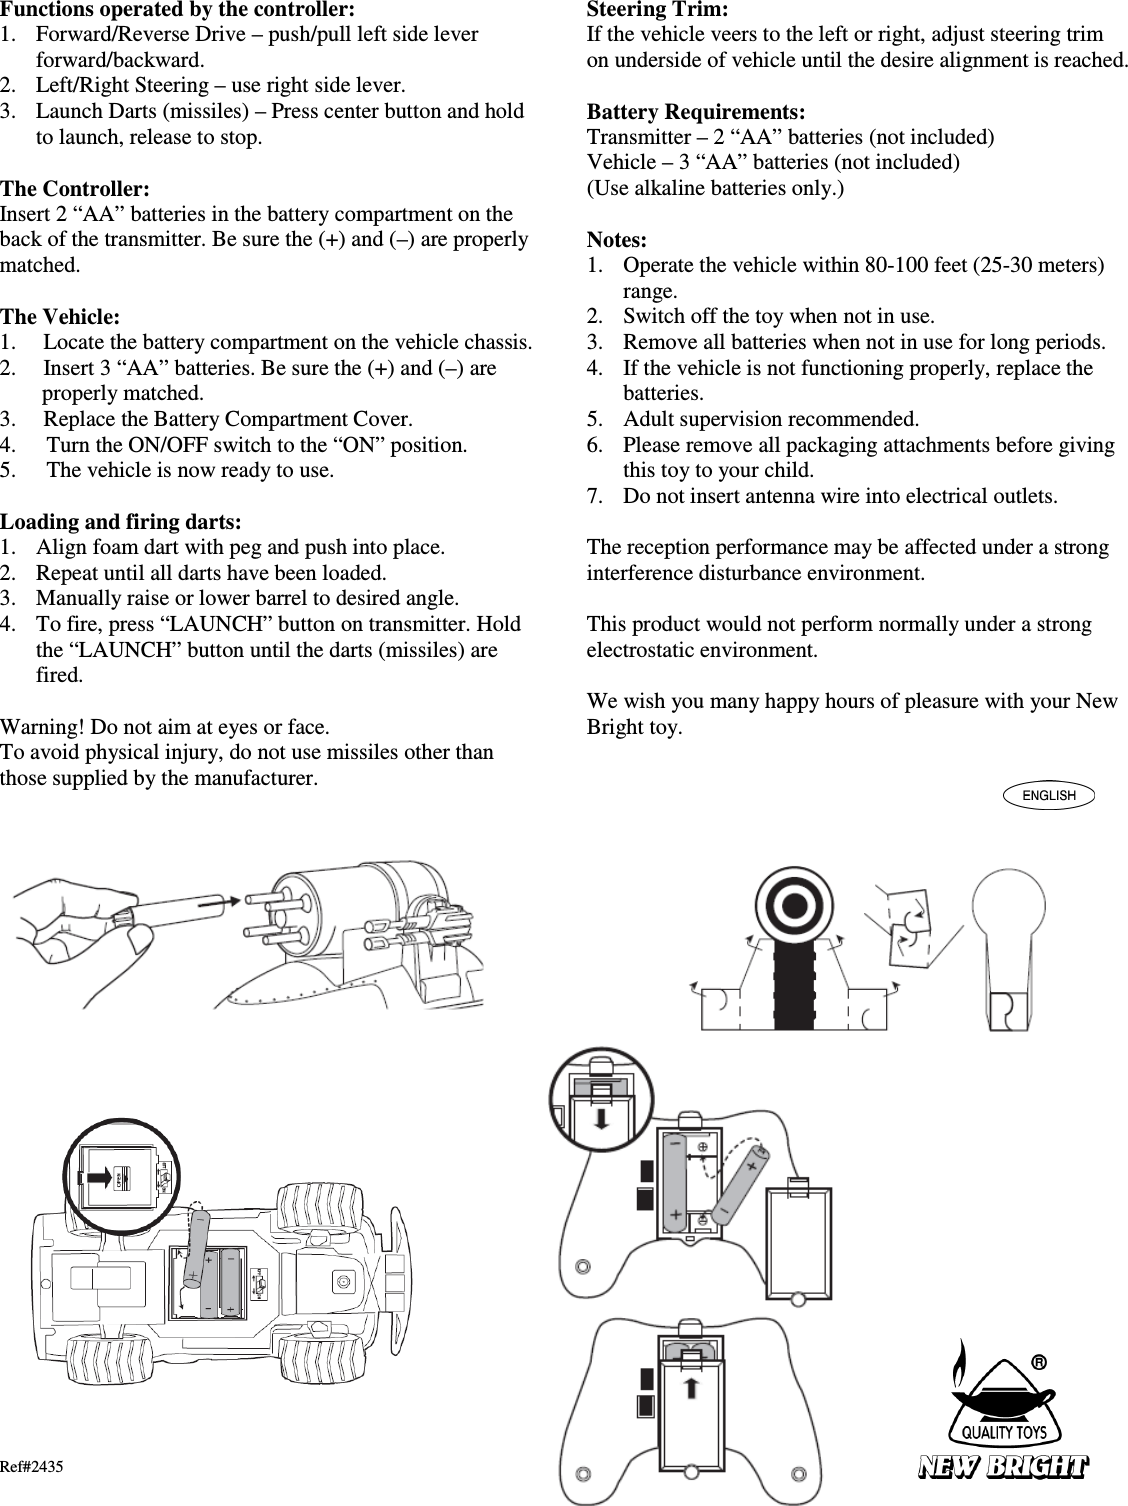 Functions operated by the controller: 1. Forward/Reverse Drive – push/pull left side lever forward/backward. 2. Left/Right Steering – use right side lever. 3. Launch Darts (missiles) – Press center button and hold to launch, release to stop.  The Controller: Insert 2 “AA” batteries in the battery compartment on the back of the transmitter. Be sure the (+) and (–) are properly matched.  The Vehicle: 1. Locate the battery compartment on the vehicle chassis.     2. Insert 3 “AA” batteries. Be sure the (+) and (–) are properly matched. 3. Replace the Battery Compartment Cover. 4. Turn the ON/OFF switch to the “ON” position.     5. The vehicle is now ready to use.    Loading and firing darts: 1. Align foam dart with peg and push into place. 2. Repeat until all darts have been loaded. 3. Manually raise or lower barrel to desired angle. 4. To fire, press “LAUNCH” button on transmitter. Hold the “LAUNCH” button until the darts (missiles) are fired.  Warning! Do not aim at eyes or face. To avoid physical injury, do not use missiles other than those supplied by the manufacturer.                             Ref#2435 Steering Trim: If the vehicle veers to the left or right, adjust steering trim on underside of vehicle until the desire alignment is reached.  Battery Requirements: Transmitter – 2 “AA” batteries (not included) Vehicle – 3 “AA” batteries (not included) (Use alkaline batteries only.)  Notes: 1. Operate the vehicle within 80-100 feet (25-30 meters) range. 2. Switch off the toy when not in use. 3. Remove all batteries when not in use for long periods. 4. If the vehicle is not functioning properly, replace the batteries. 5. Adult supervision recommended. 6. Please remove all packaging attachments before giving this toy to your child. 7. Do not insert antenna wire into electrical outlets.  The reception performance may be affected under a strong interference disturbance environment.  This product would not perform normally under a strong electrostatic environment.  We wish you many happy hours of pleasure with your New Bright toy.   